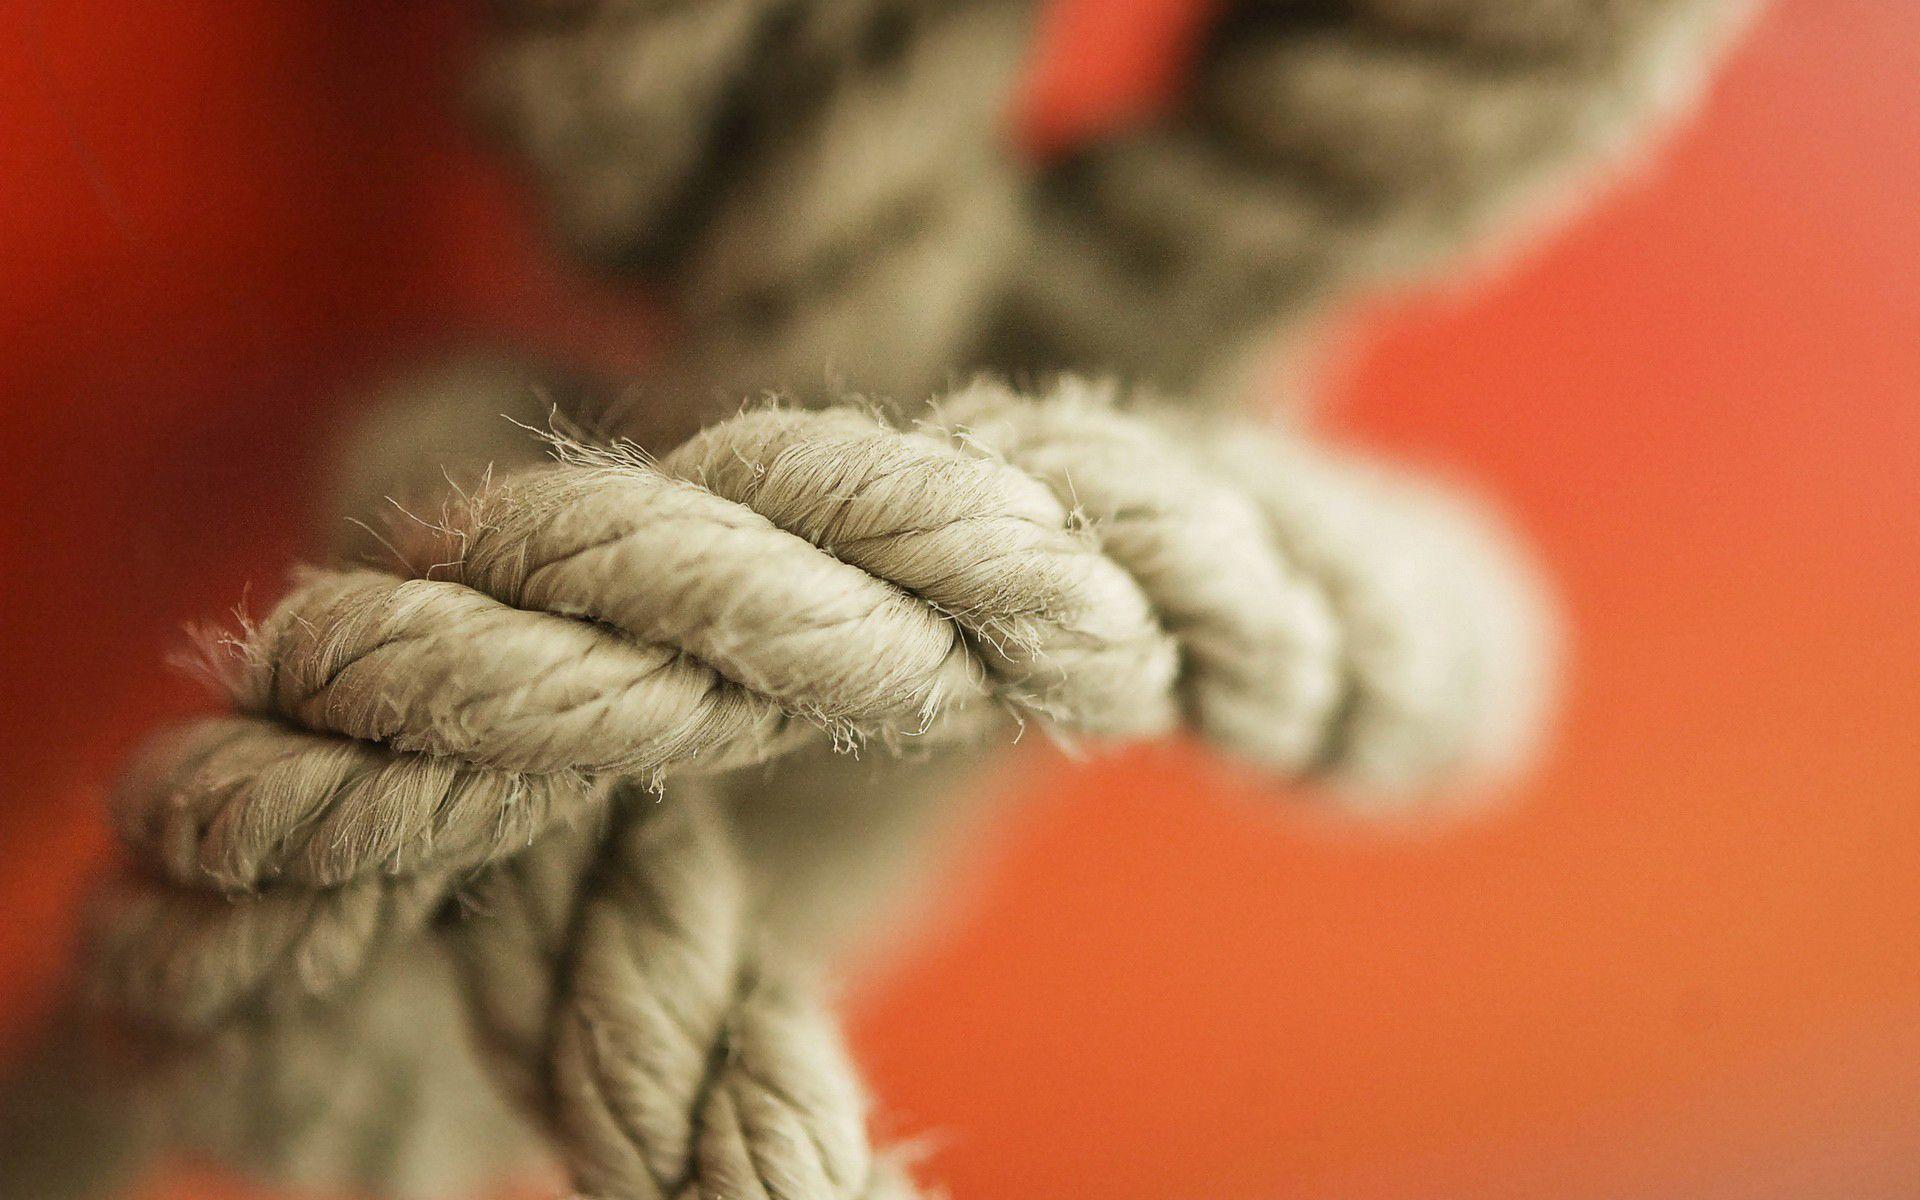 Rope Close Up Wallpaper 45032 1920x1200 px